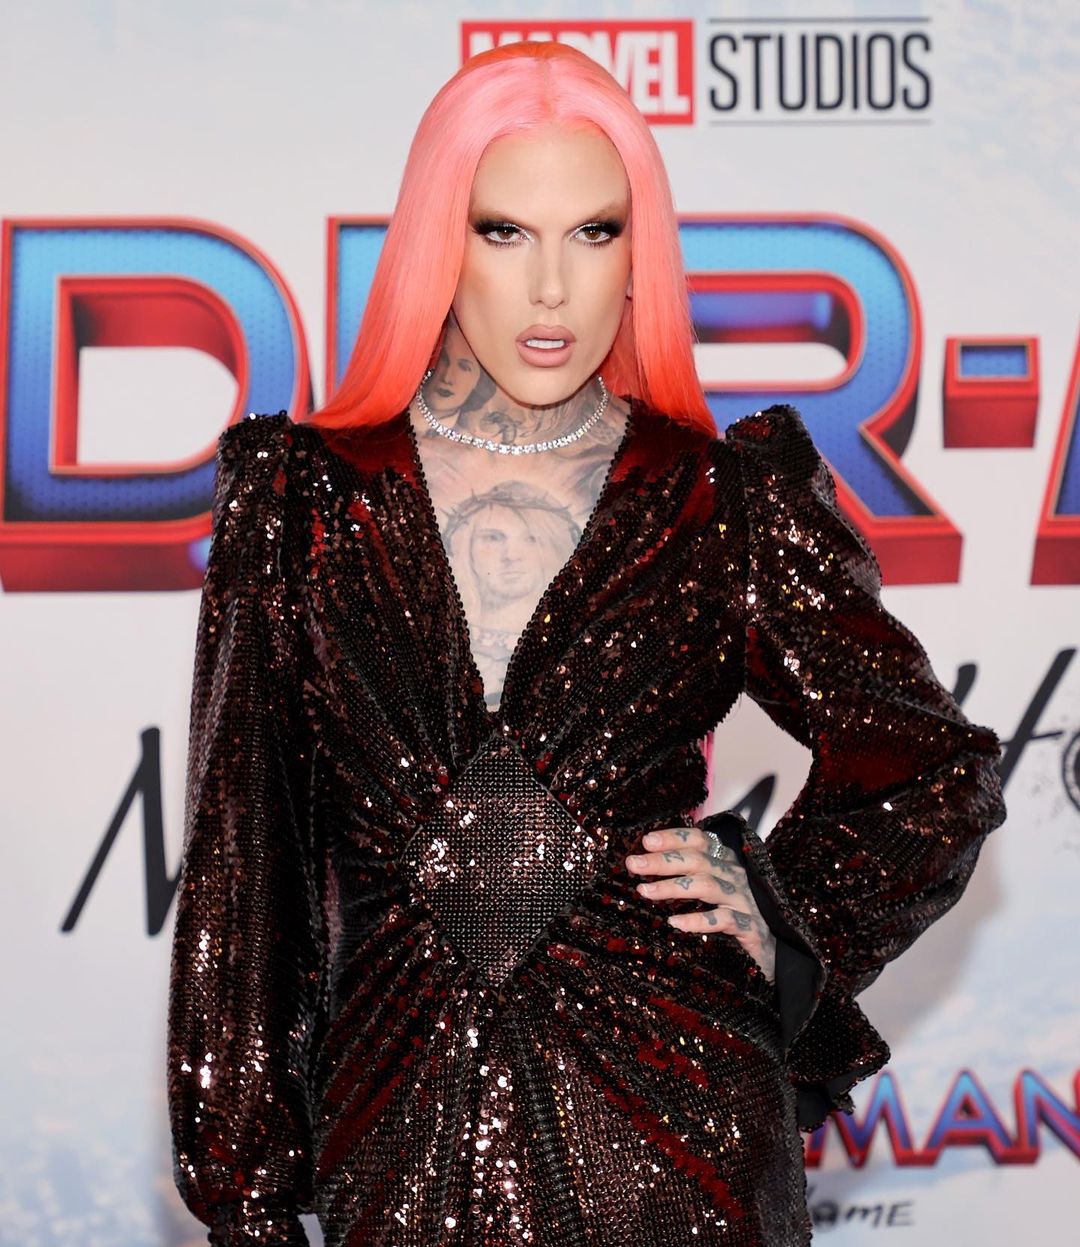 Jeffree Star: Top 15 most influential beauty gurus in the world